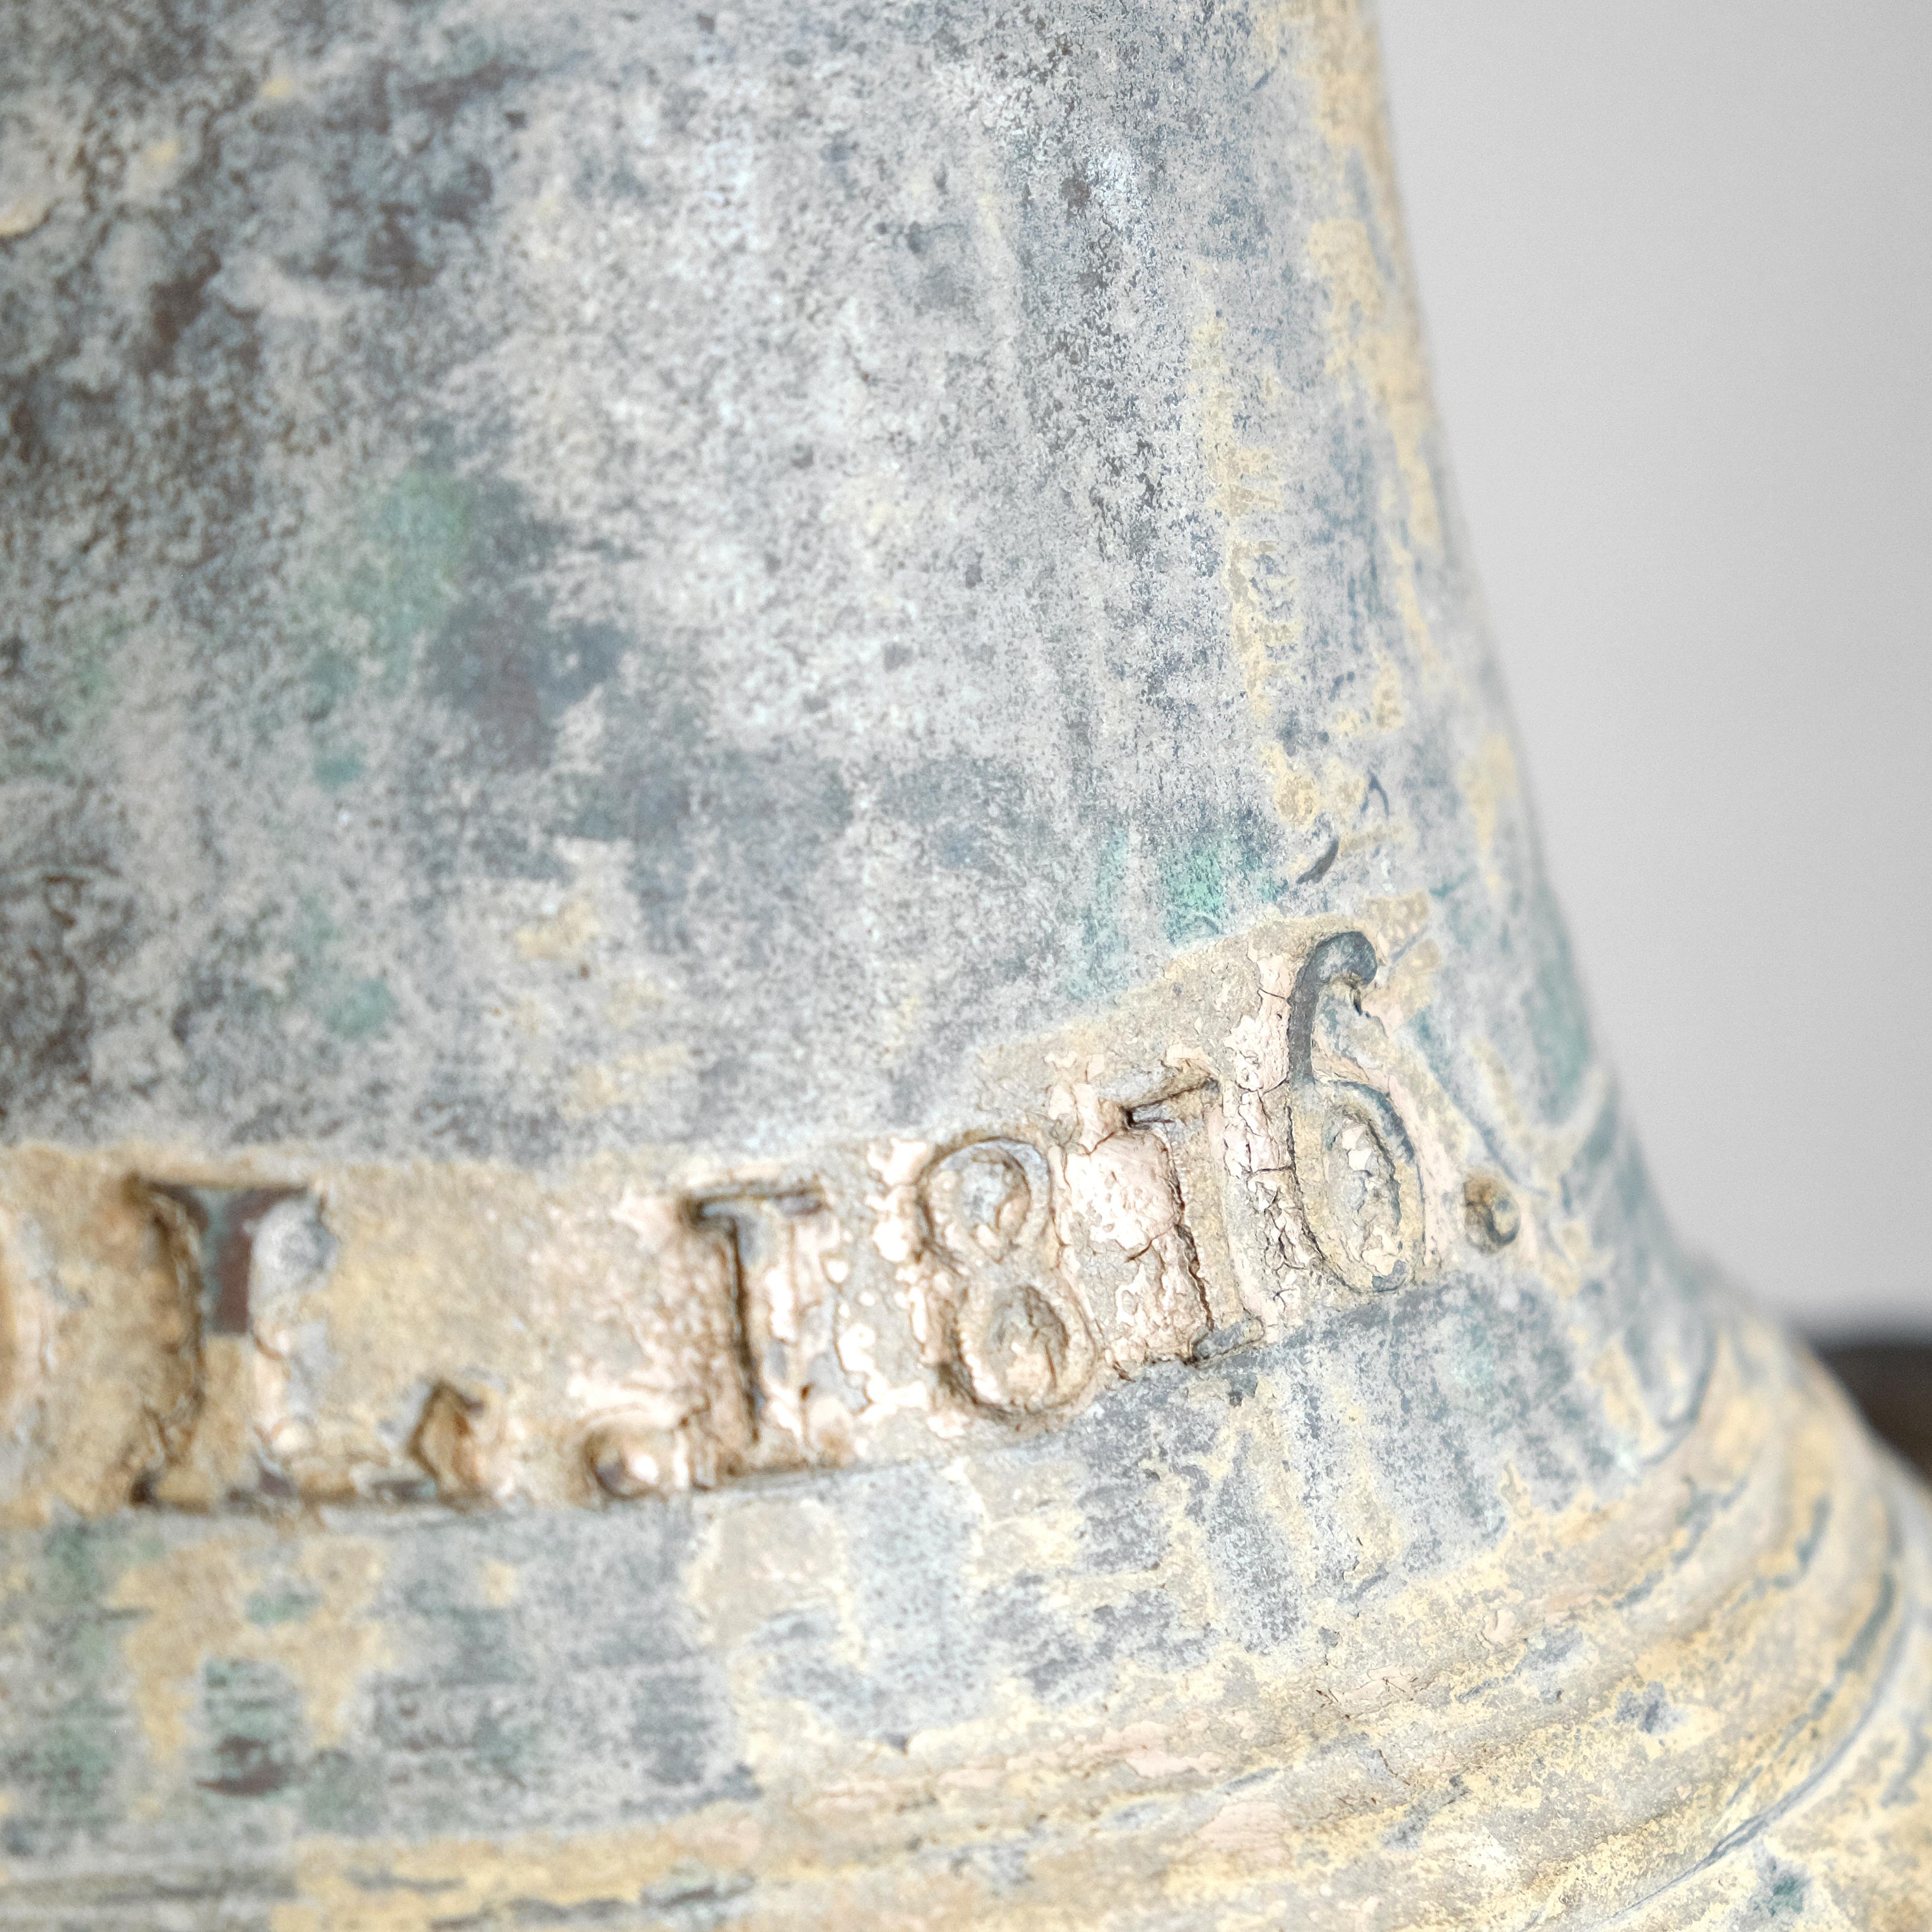 Free shipping to mainland US, UK and Europe.

An early bronze chapel bell, cast with the utmost quality by the bellfounder Nathaniel Ress Westcott of Redcliffe Street, Bristol in 1816. Fully cast maker’s marks and dated as such. The canons and